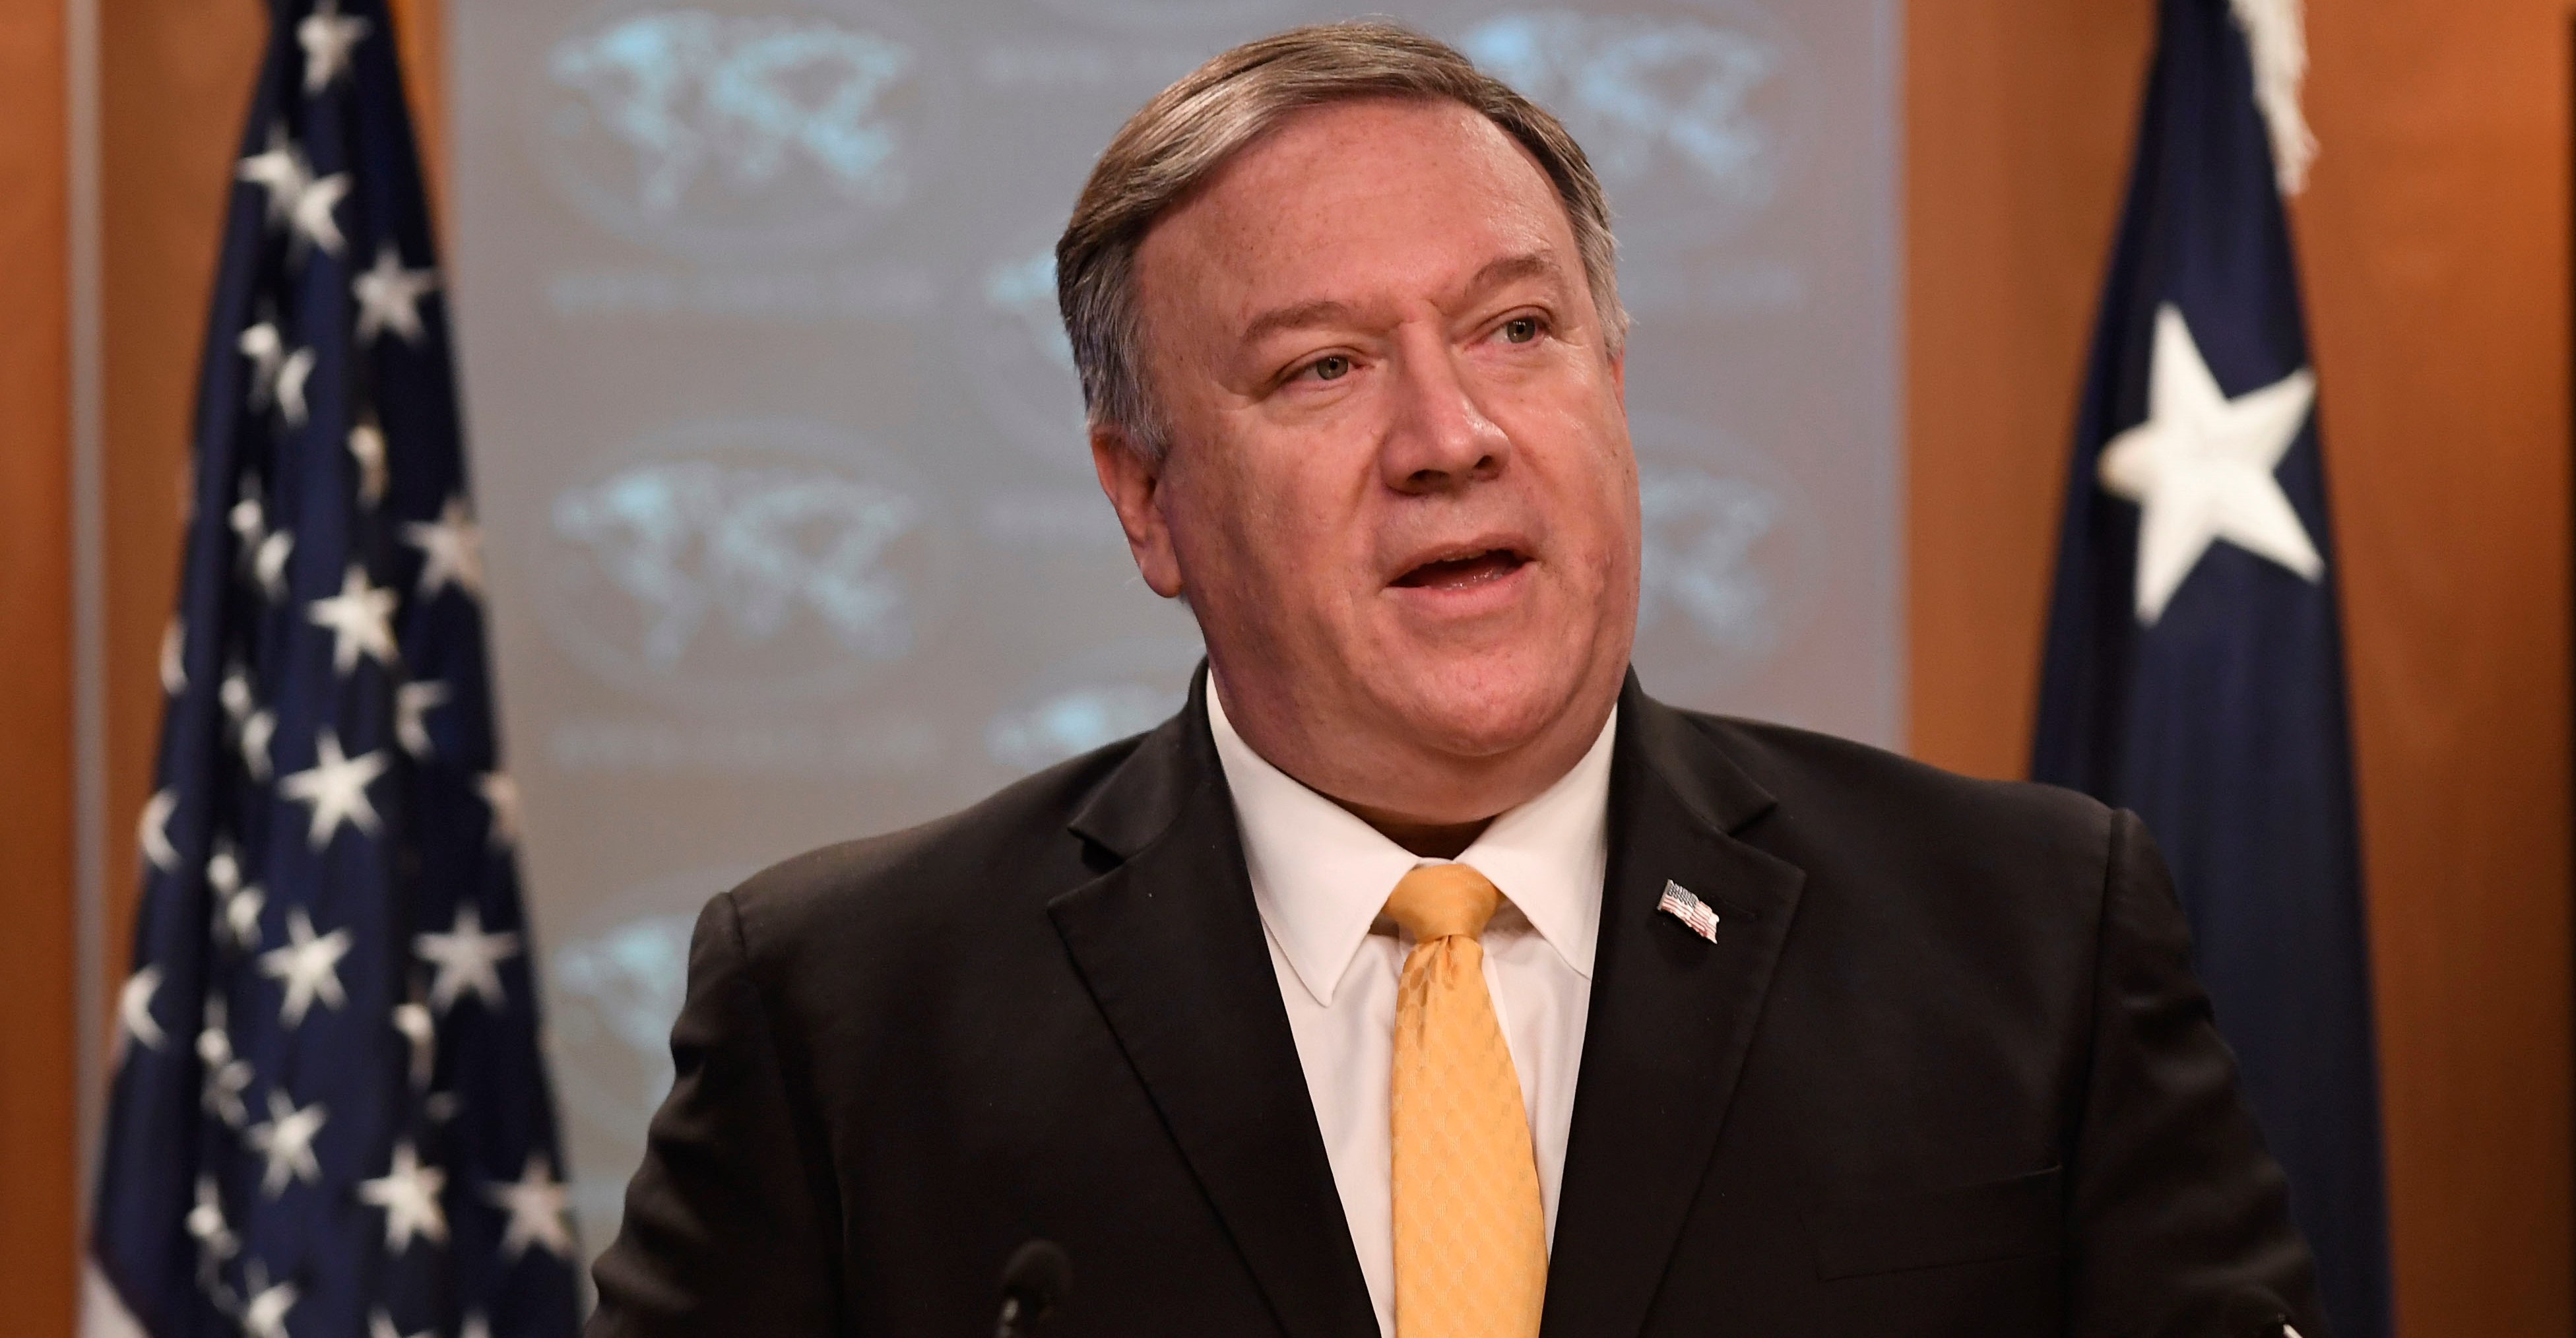 Pompeo will meet with Russia's Putin, Lavrov during visit to Russia